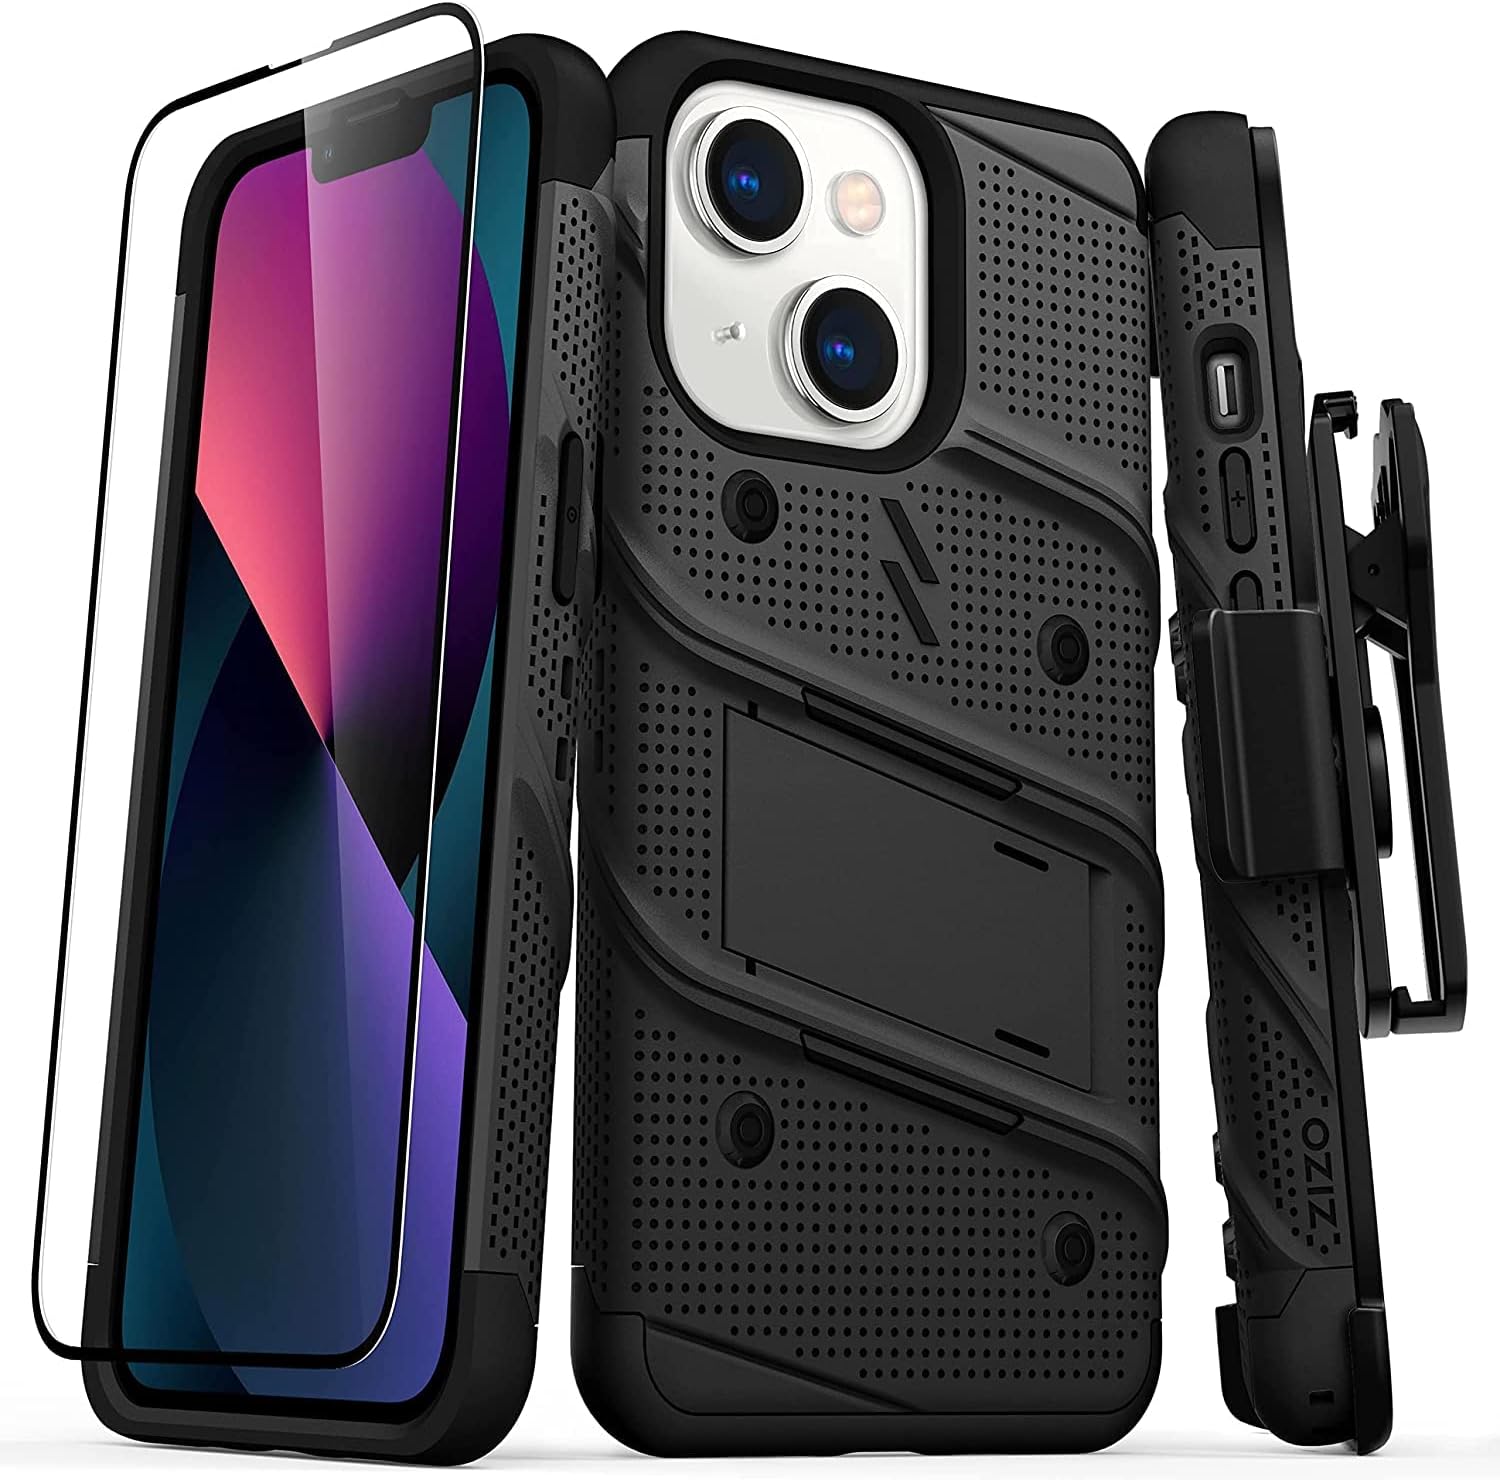 ZIZO Bolt Apple iPhone 13 Mini Holster Case with Tempered Glass, Built-in Kickstand & Lanyard